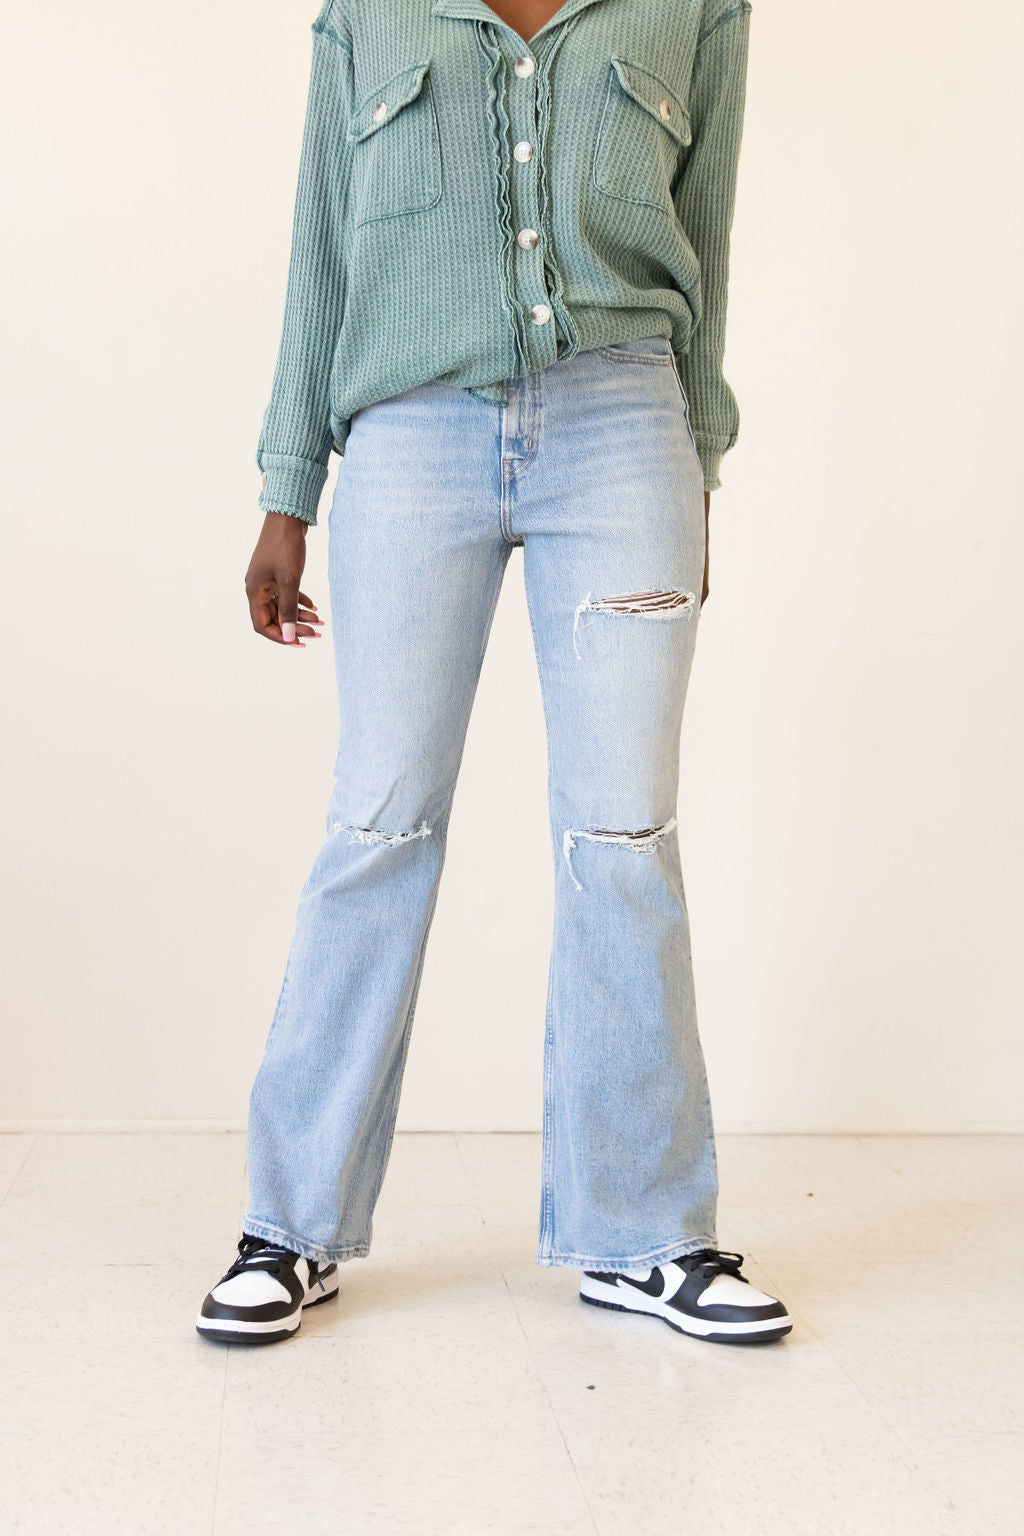 70s Flare Jeans by Levi's